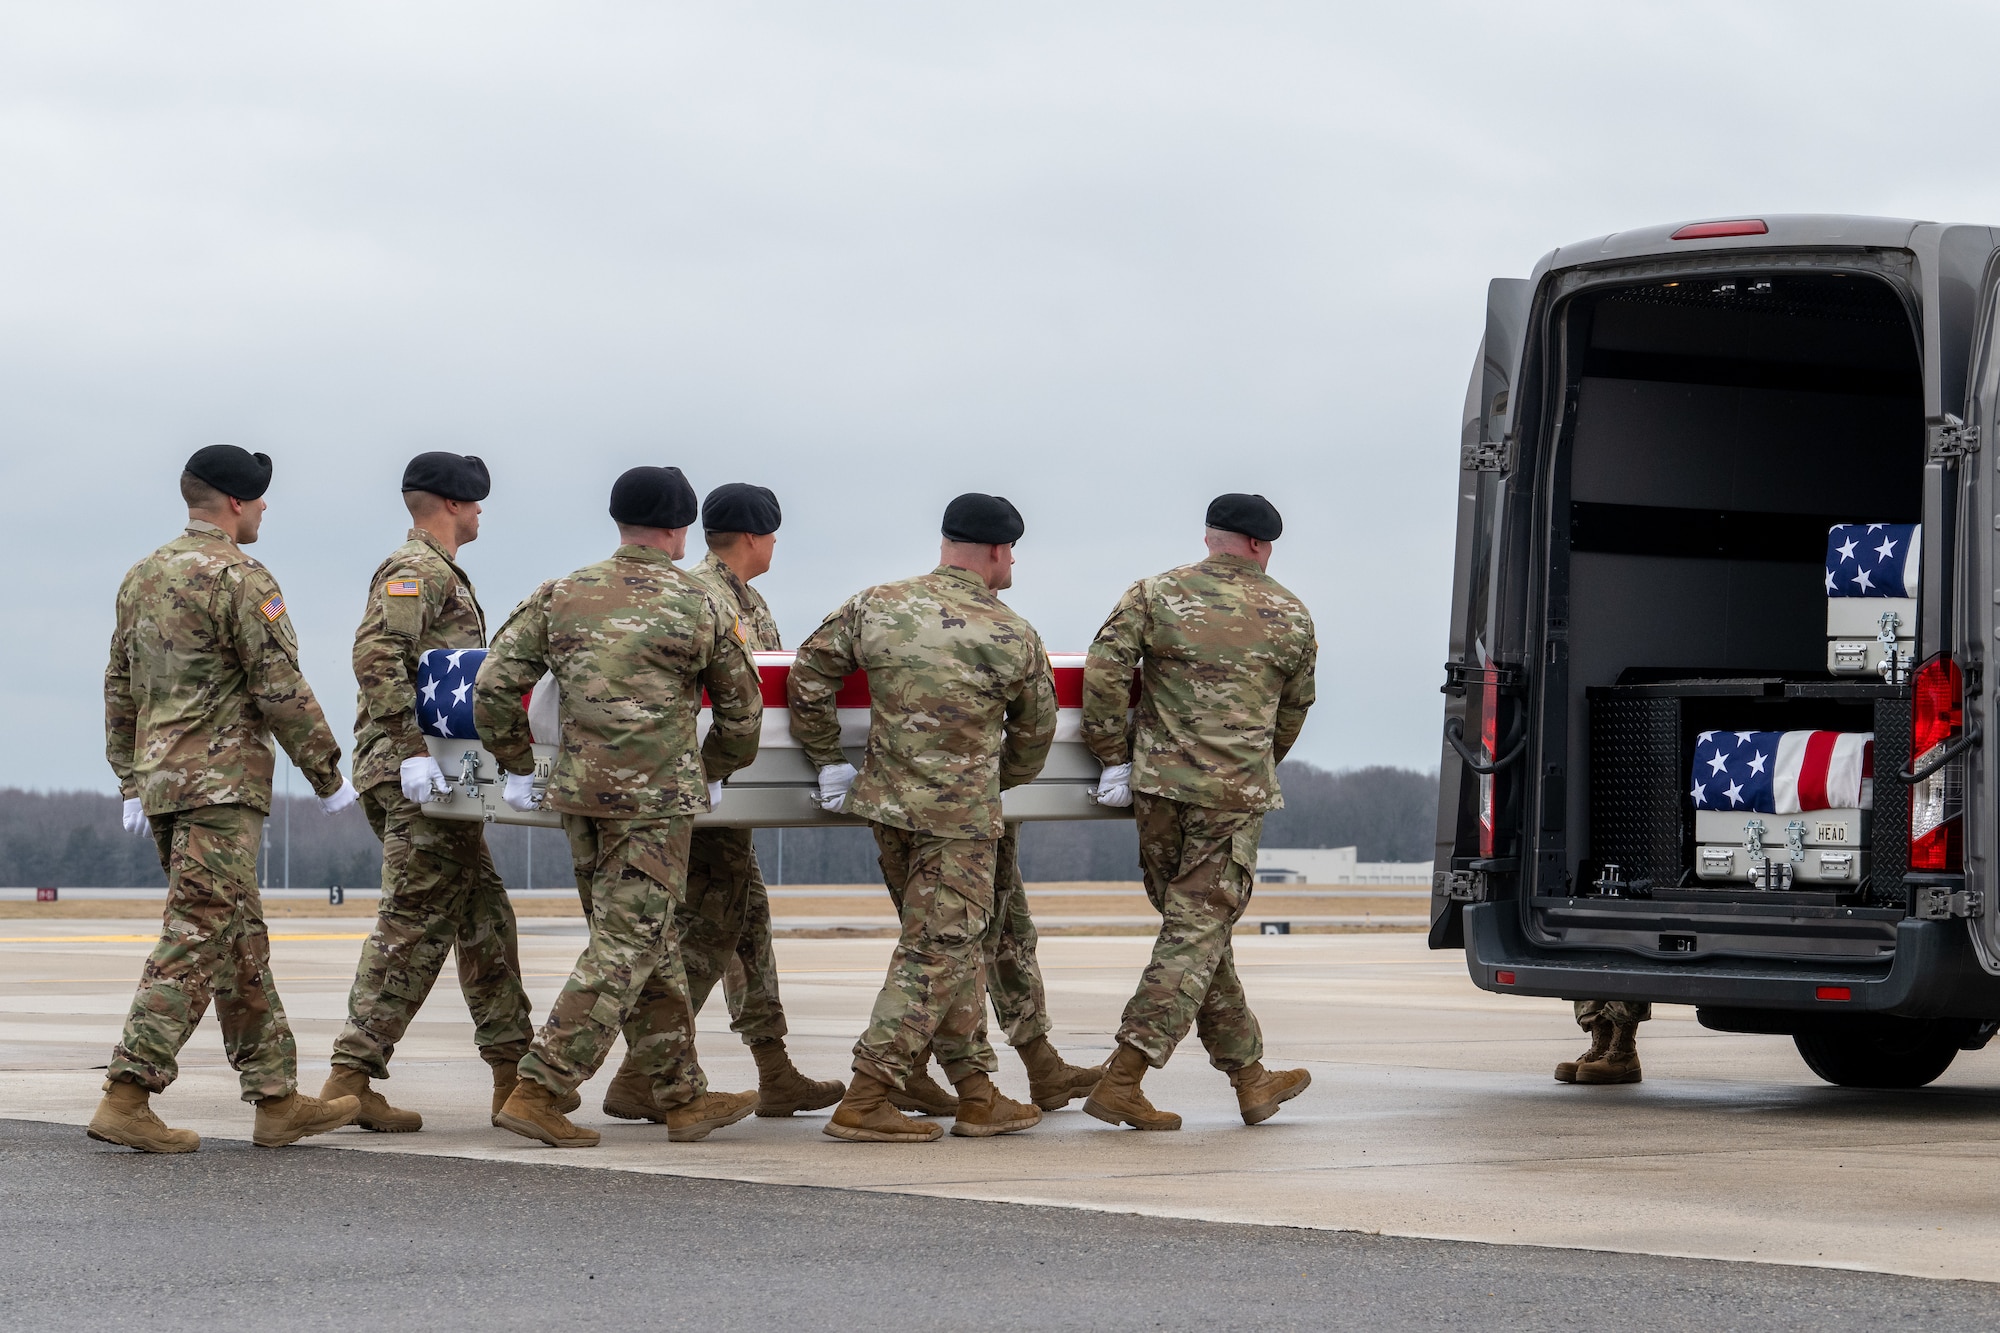 Army Sgt. Kennedy L. Sanders honored in dignified transfer Feb. 2